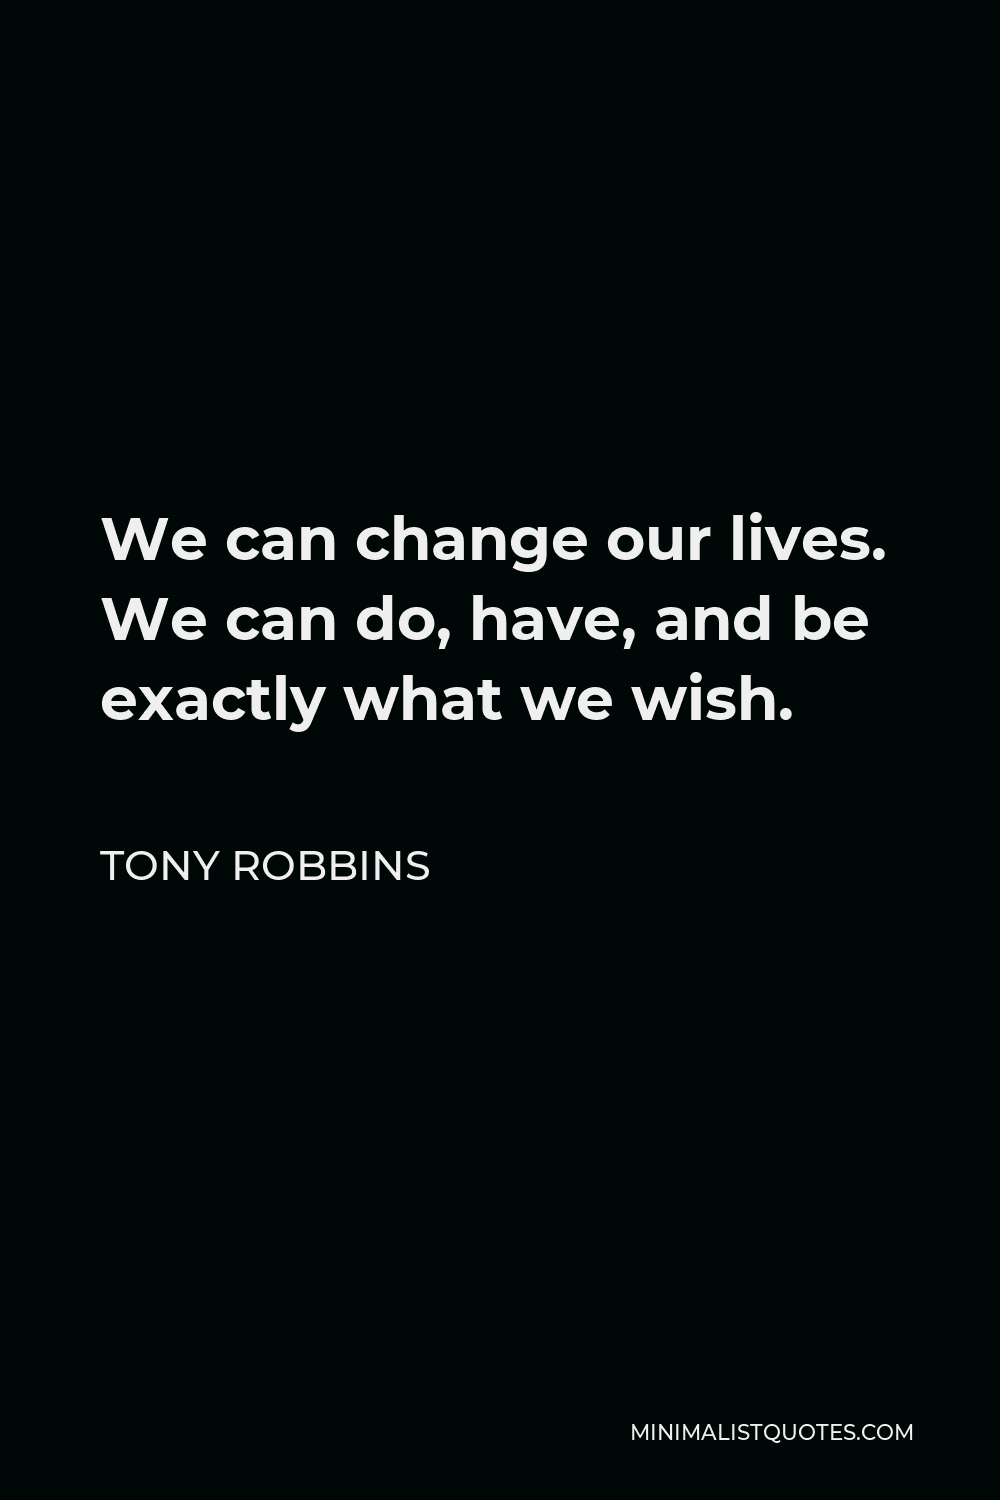 Tony Robbins Quote - We can change our lives. We can do, have, and be exactly what we wish.